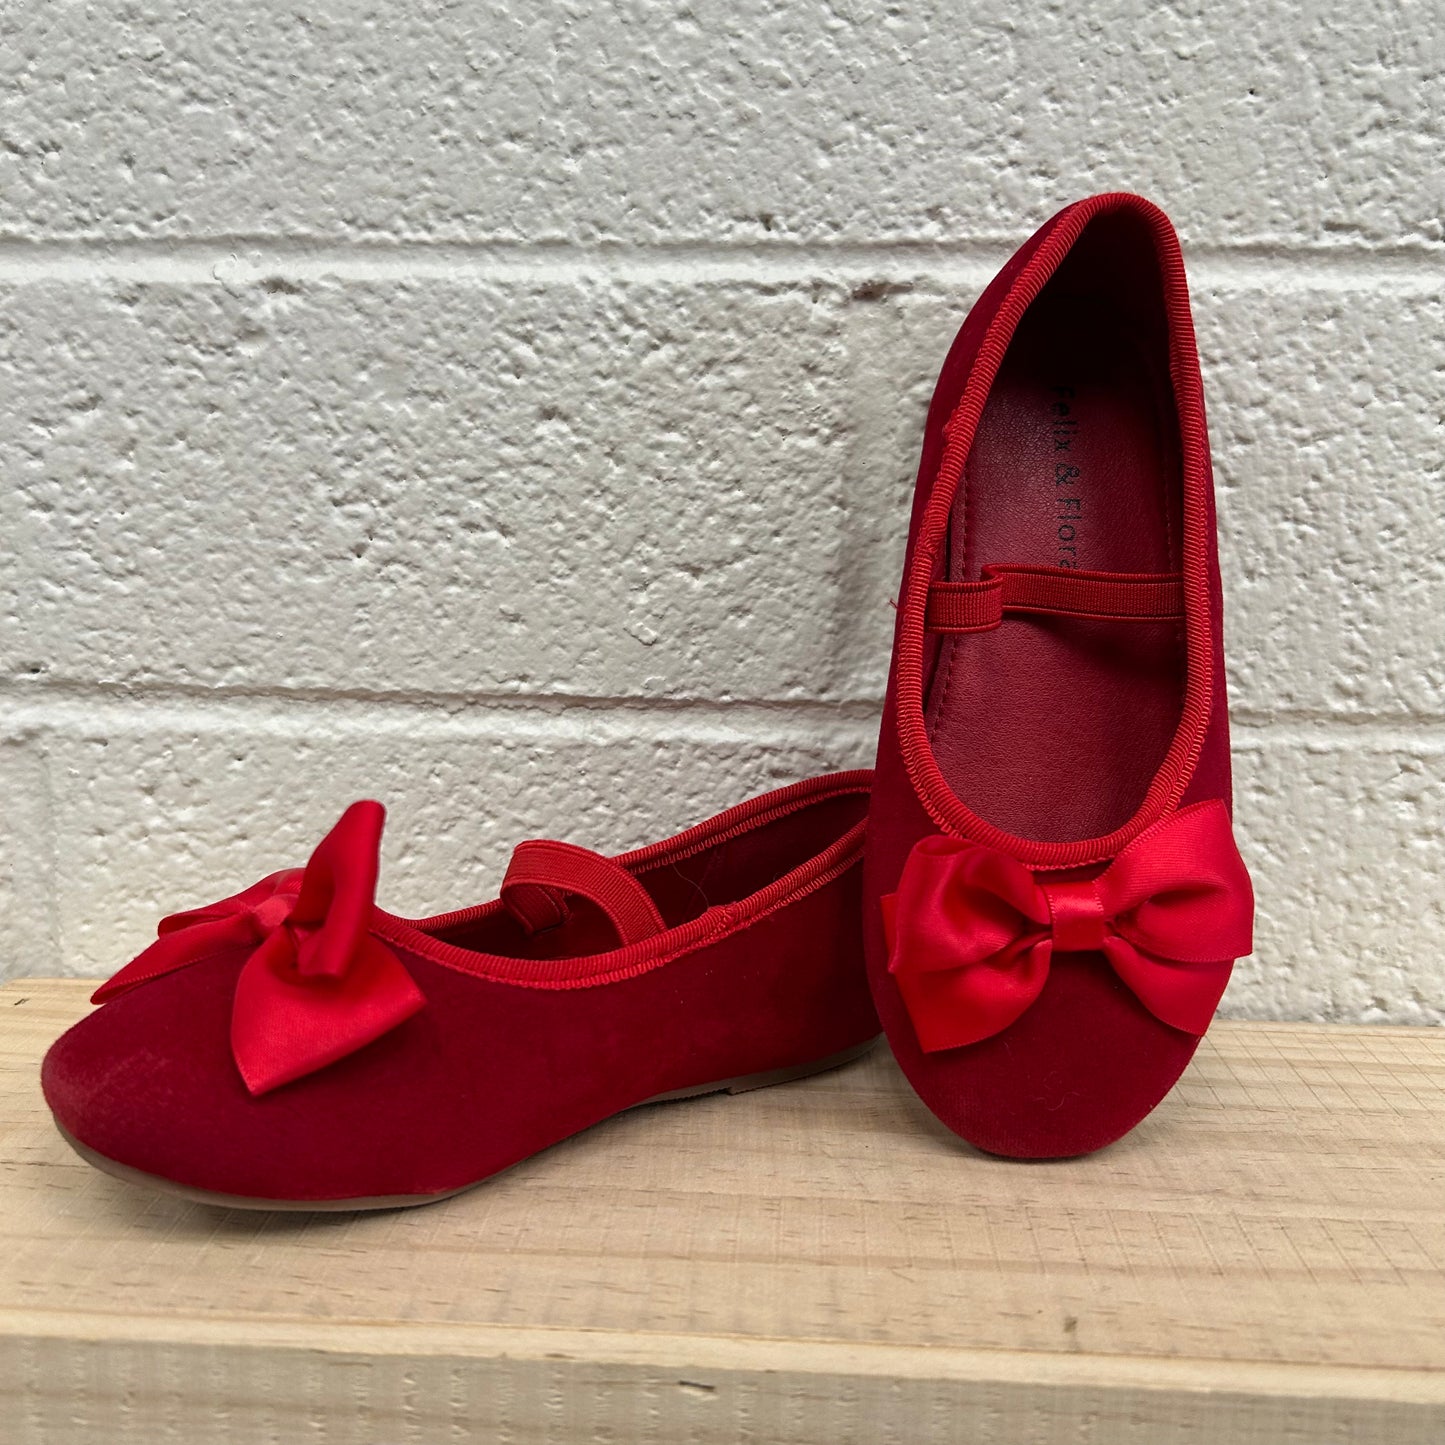 Red Canvas Shoes